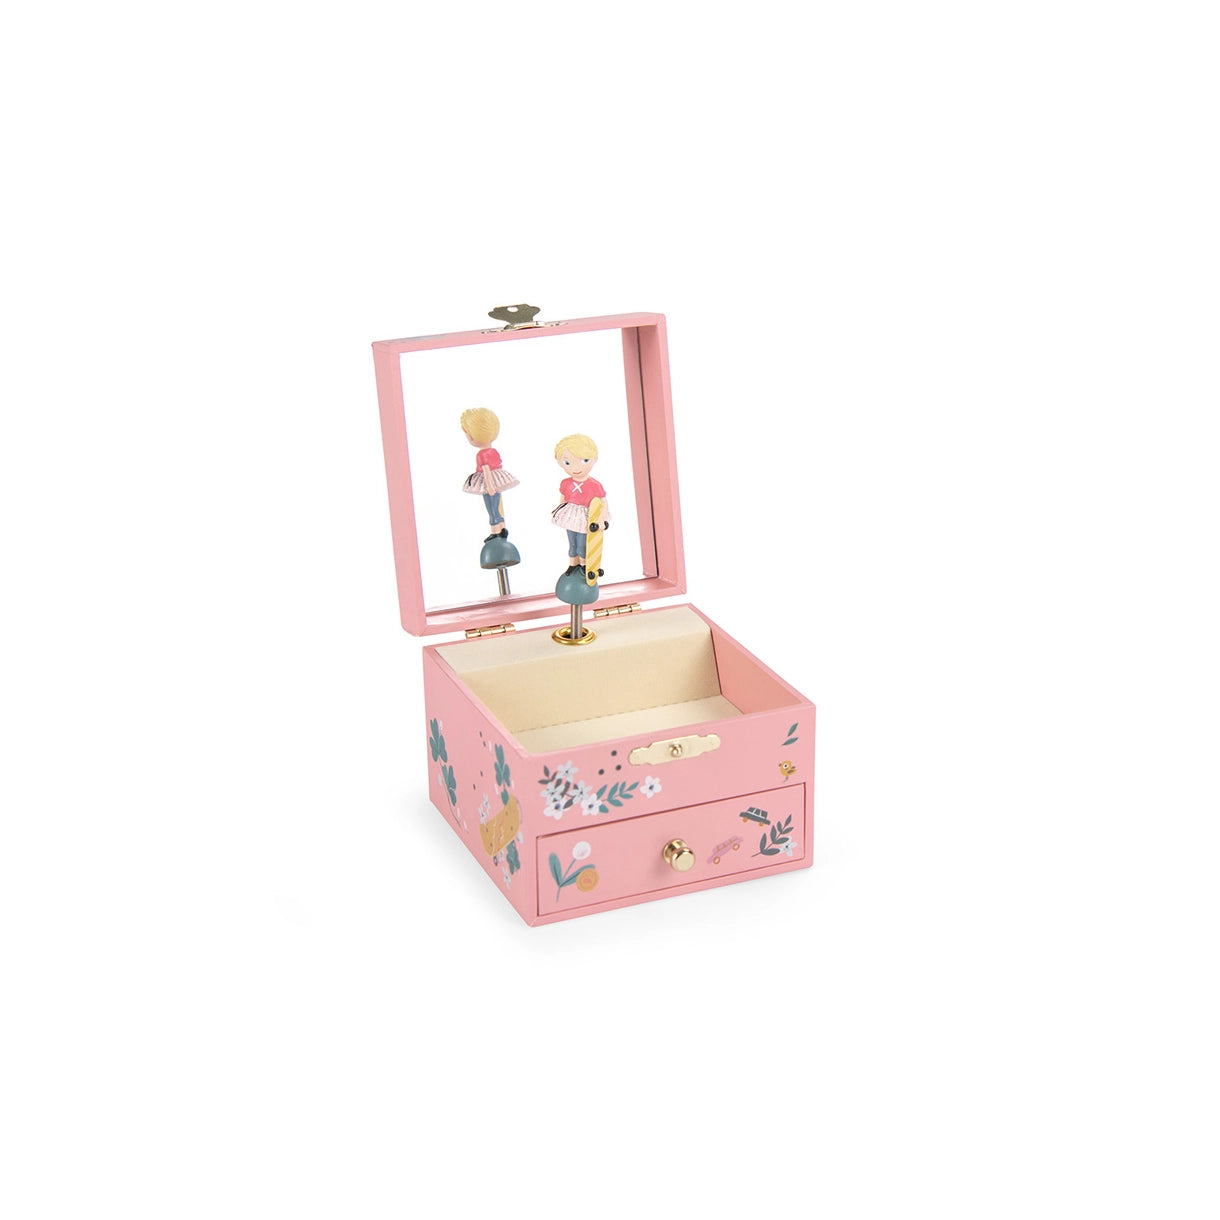 Moulin Roty - Musical Jewellery Box - Les Parisiennes